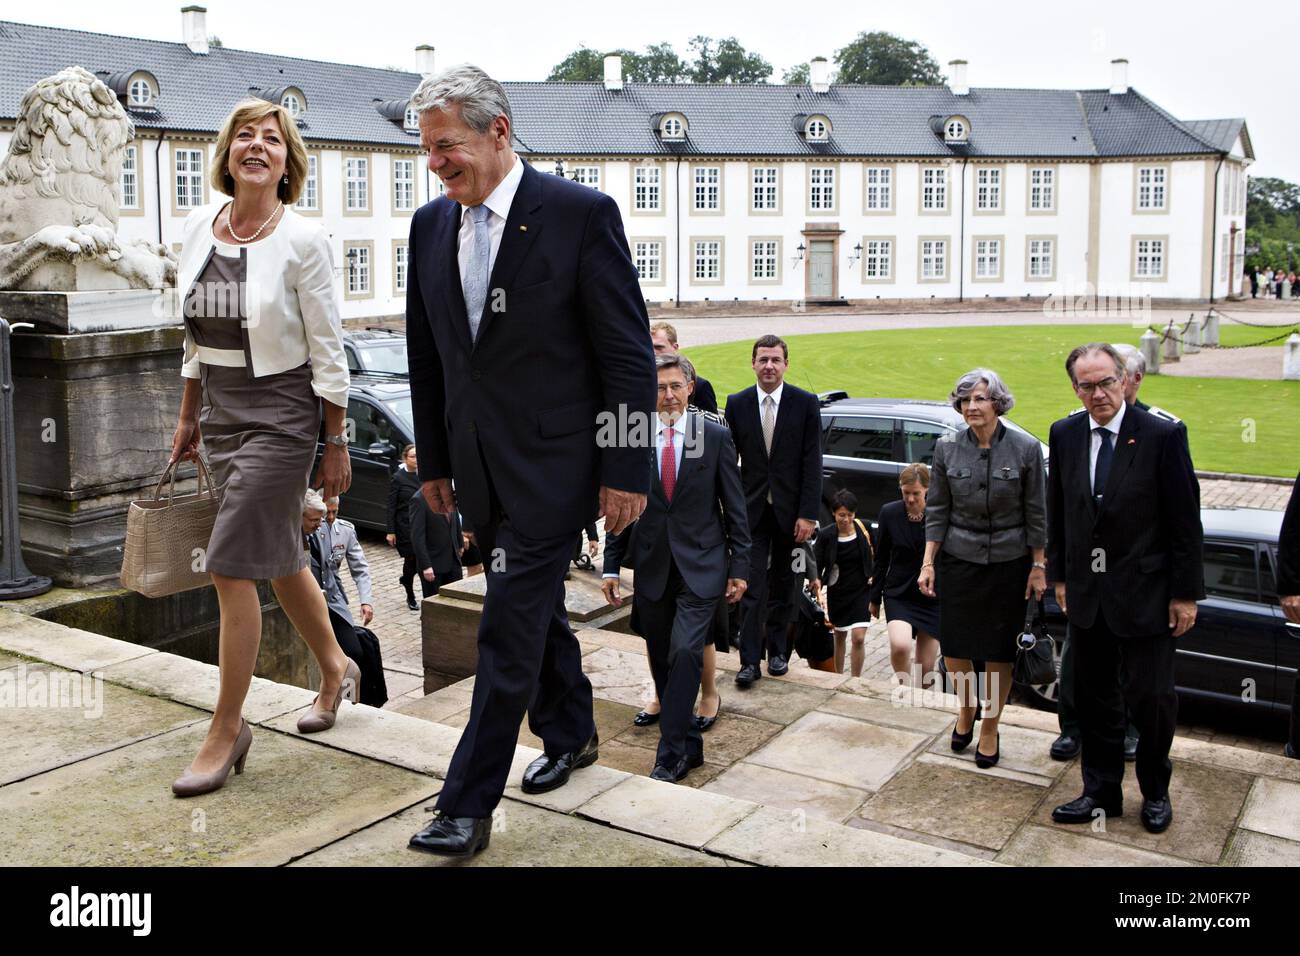 The German President Mr. Joachim Gauck and Mrs. Daniela Schadt was received Tuesday September 11th. at Fredensborg Palace by Queen Margrethe and Prince Consort Henrik on their official visit to Denmark. (Stine Bidstrup/POLFOTO) Stock Photo